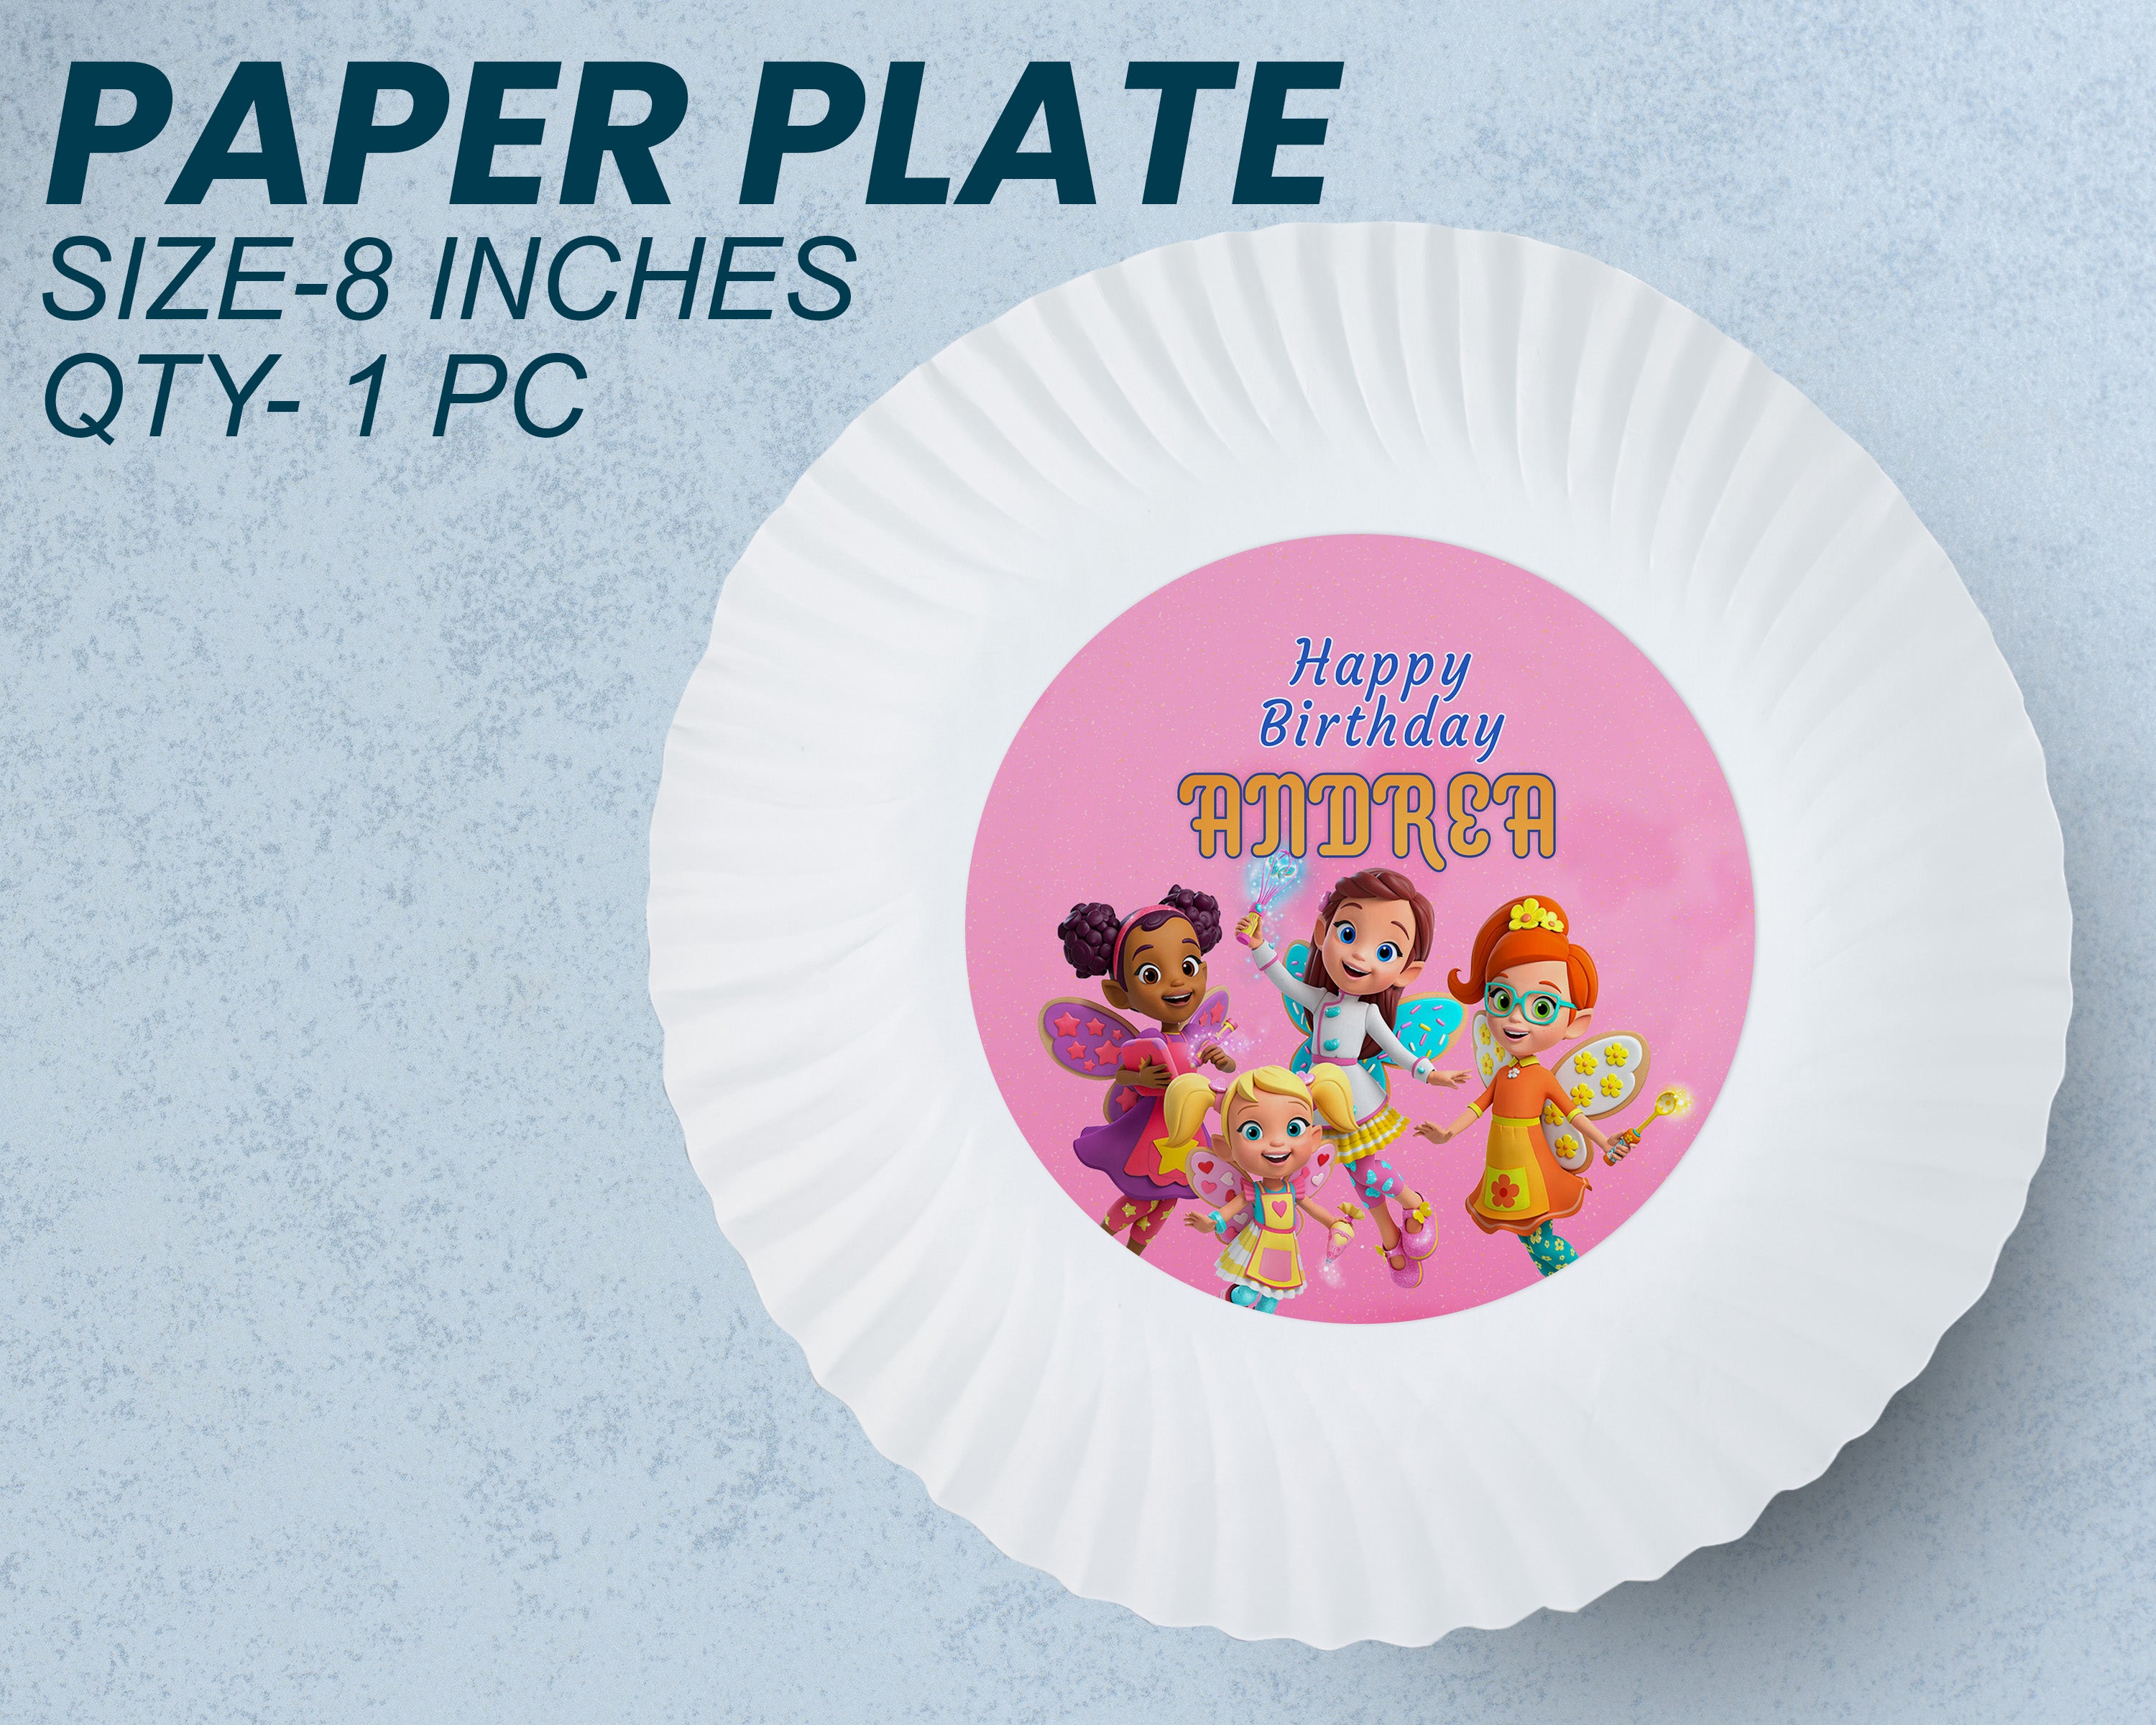 PSI Butter Beans Theme Party Cups and Plates Combo